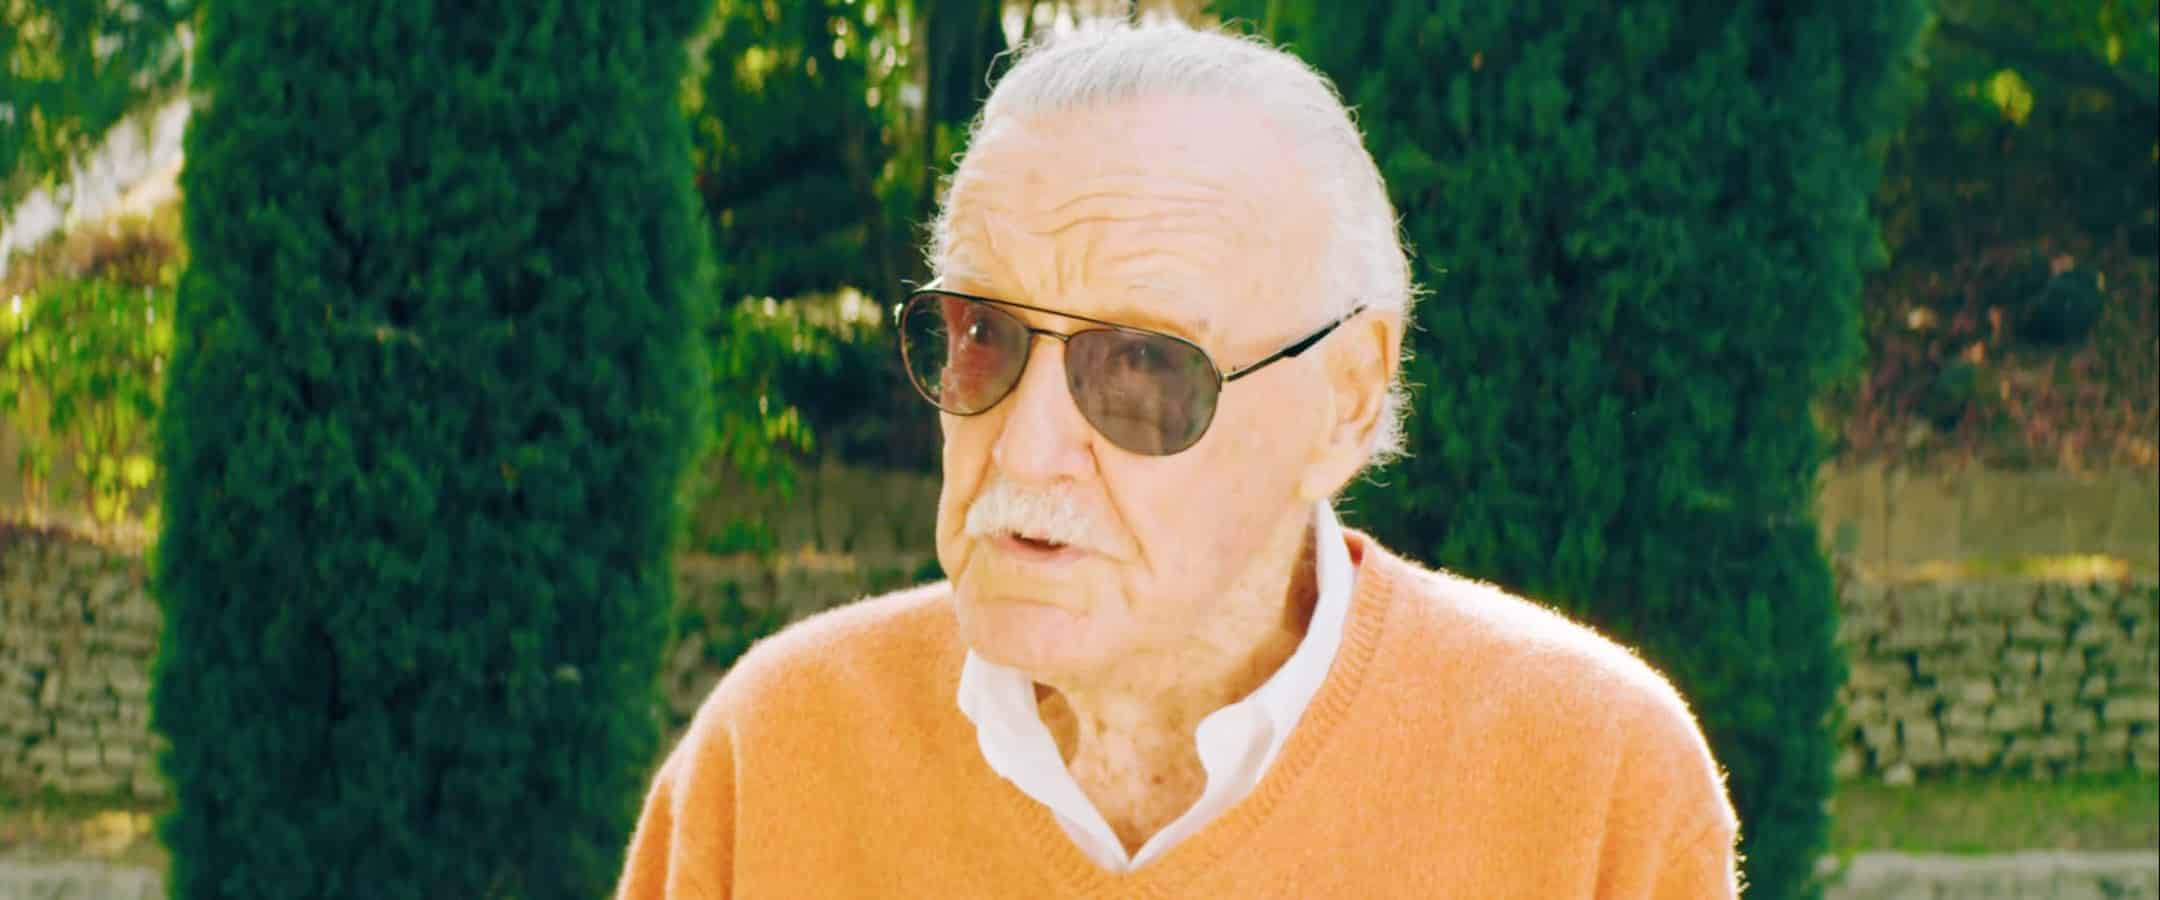 MADNESS IN THE METHOD, Stan Lee, 2019